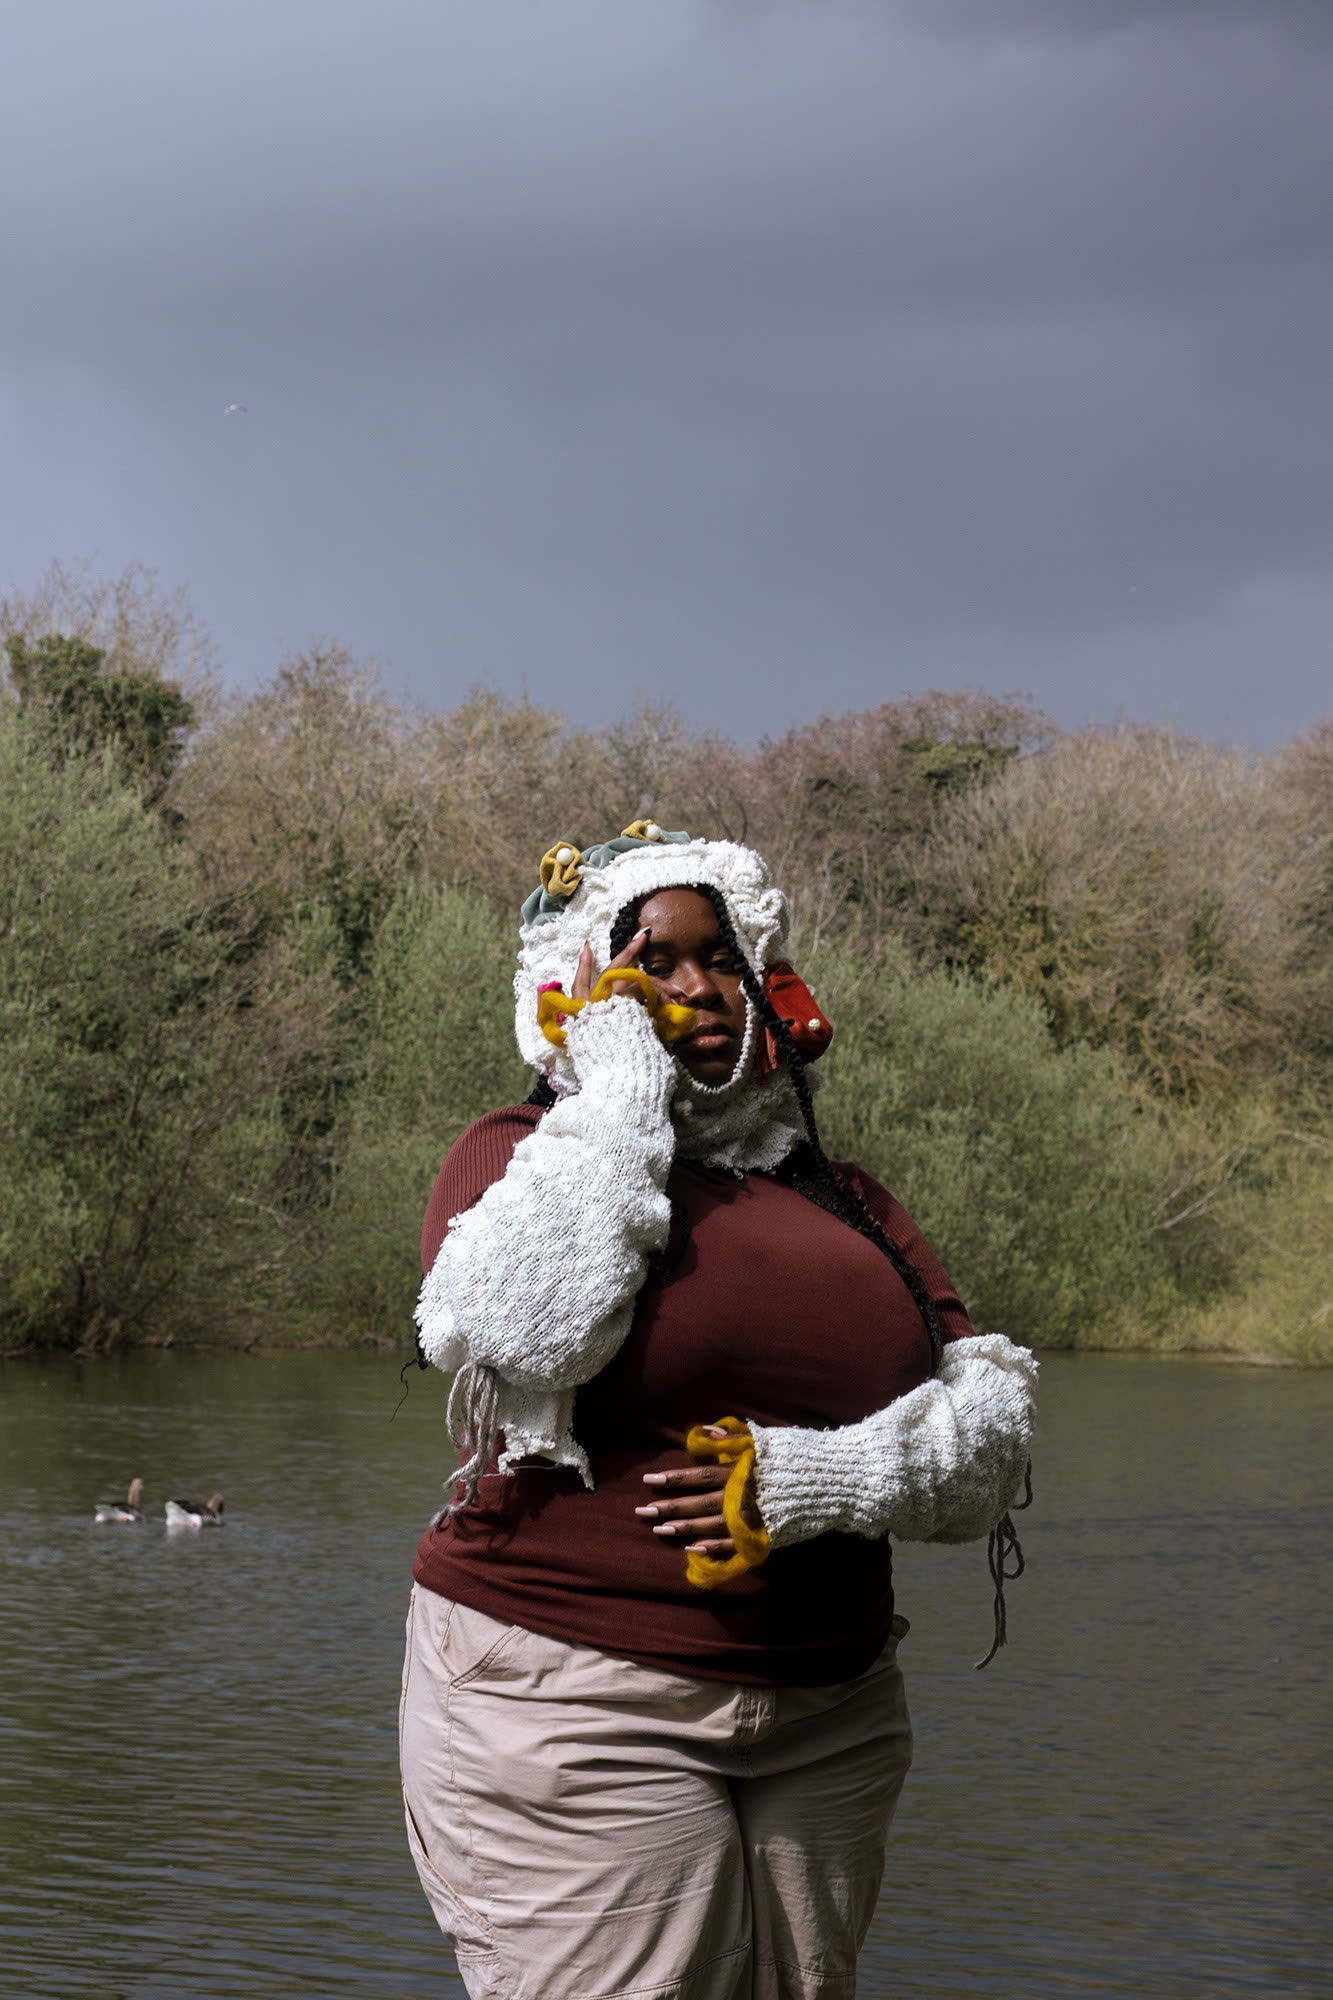 Model posed infront of a river and trees wearing pale knit headpiece and sleeves.